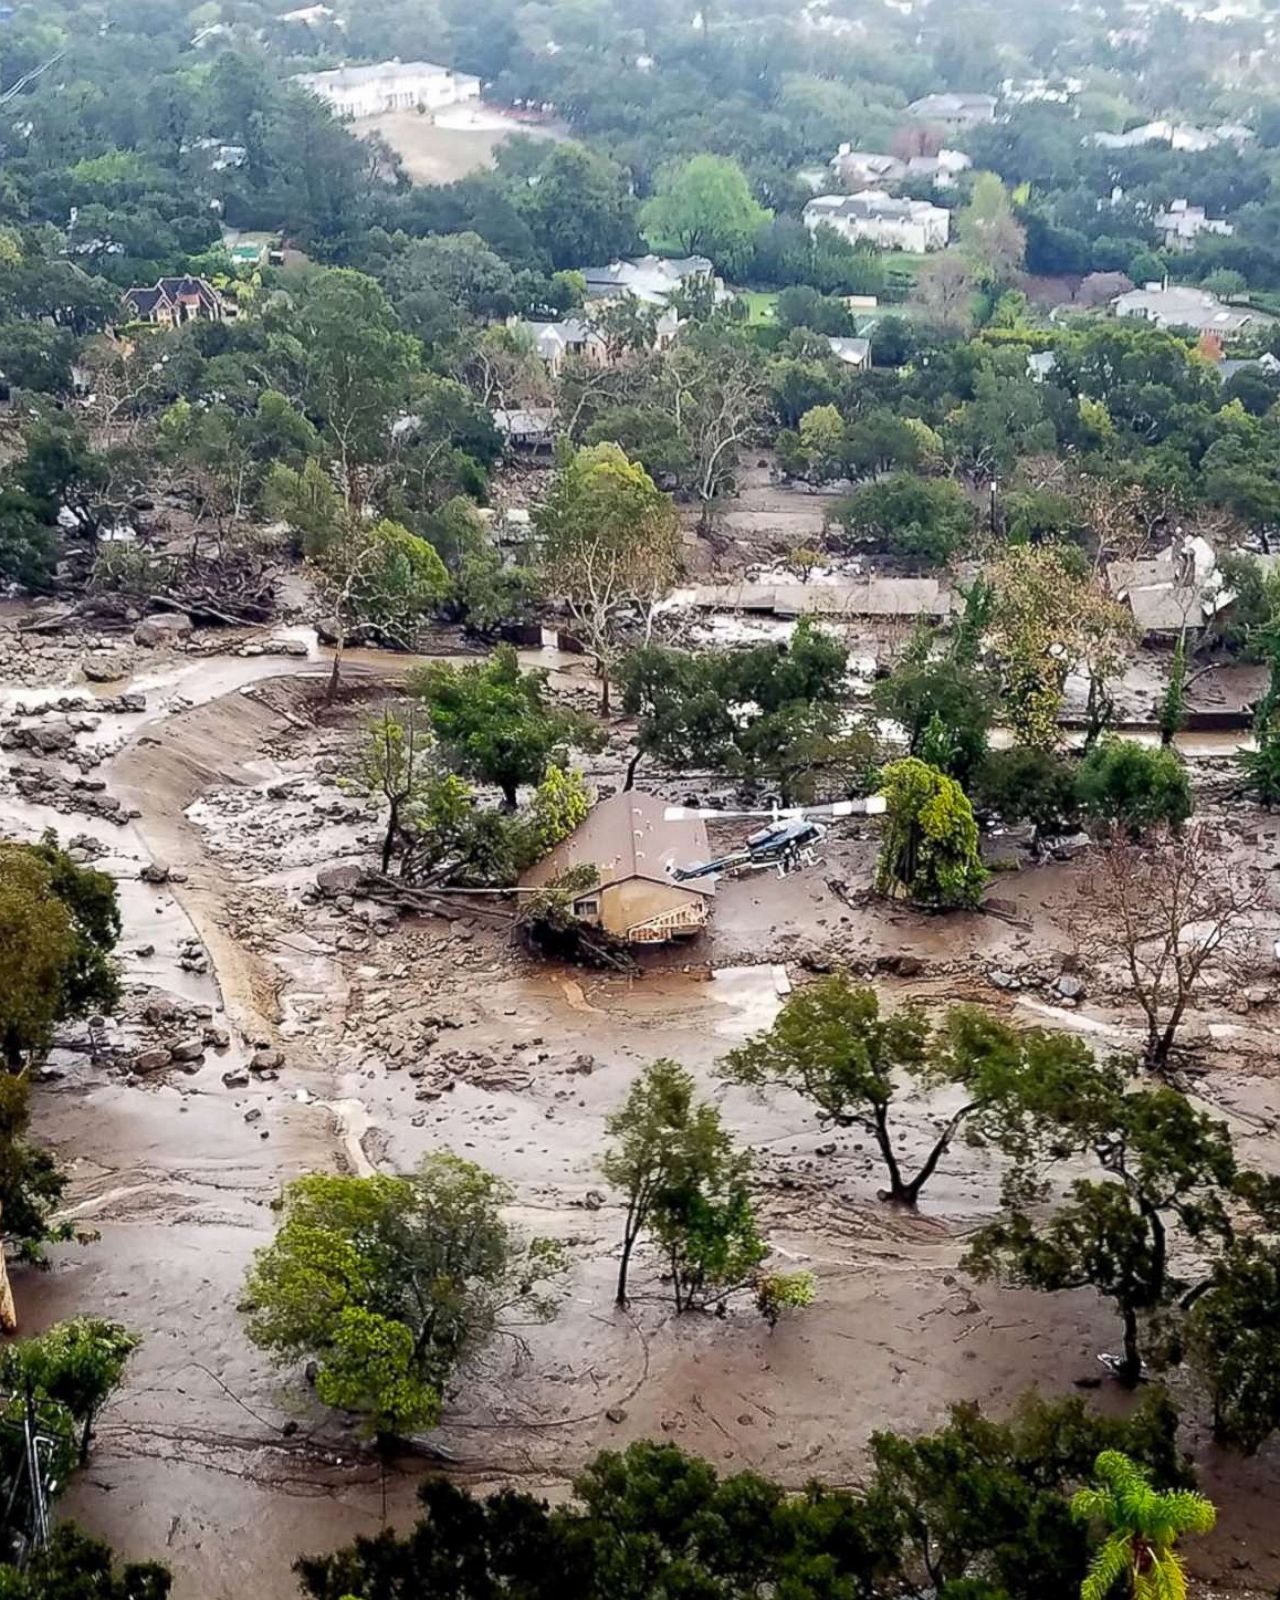 Rescuers continue searching for victims in deadly California mudslides